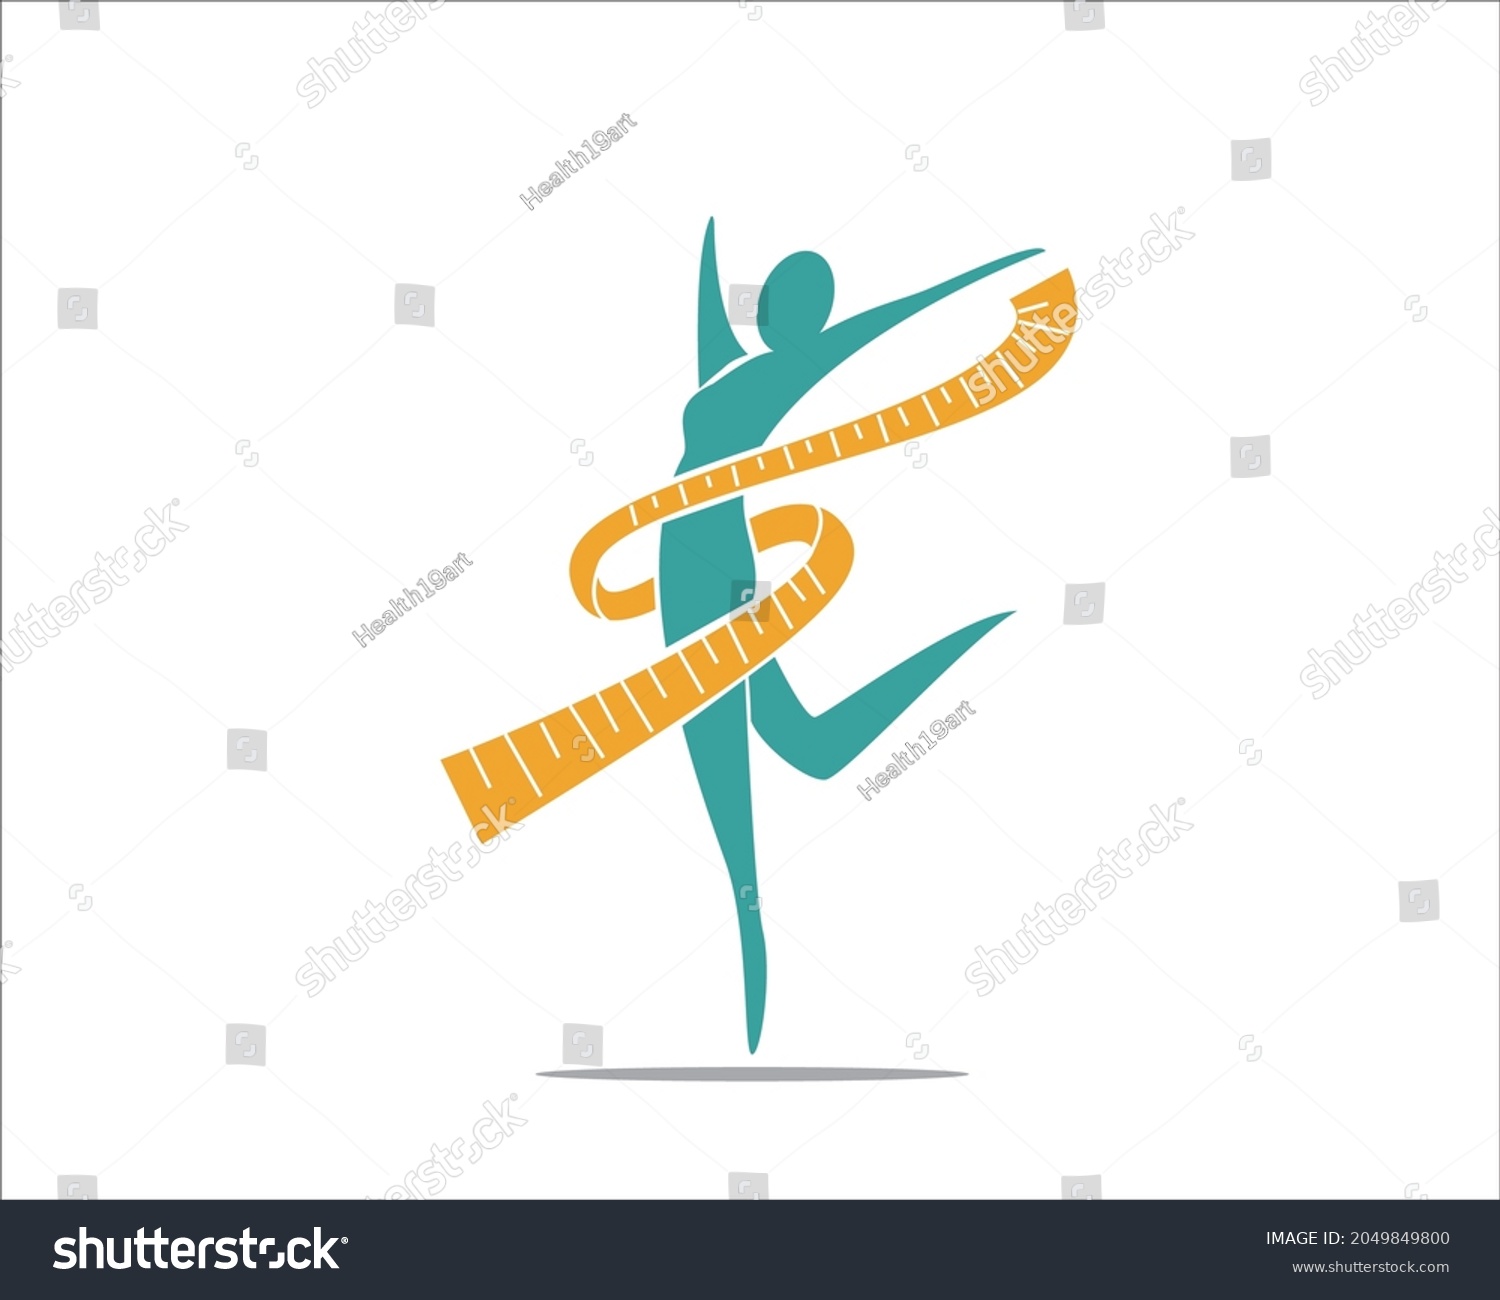 SVG of women weight loss silhouette logo designs simple for slim and clinic logo and health service svg